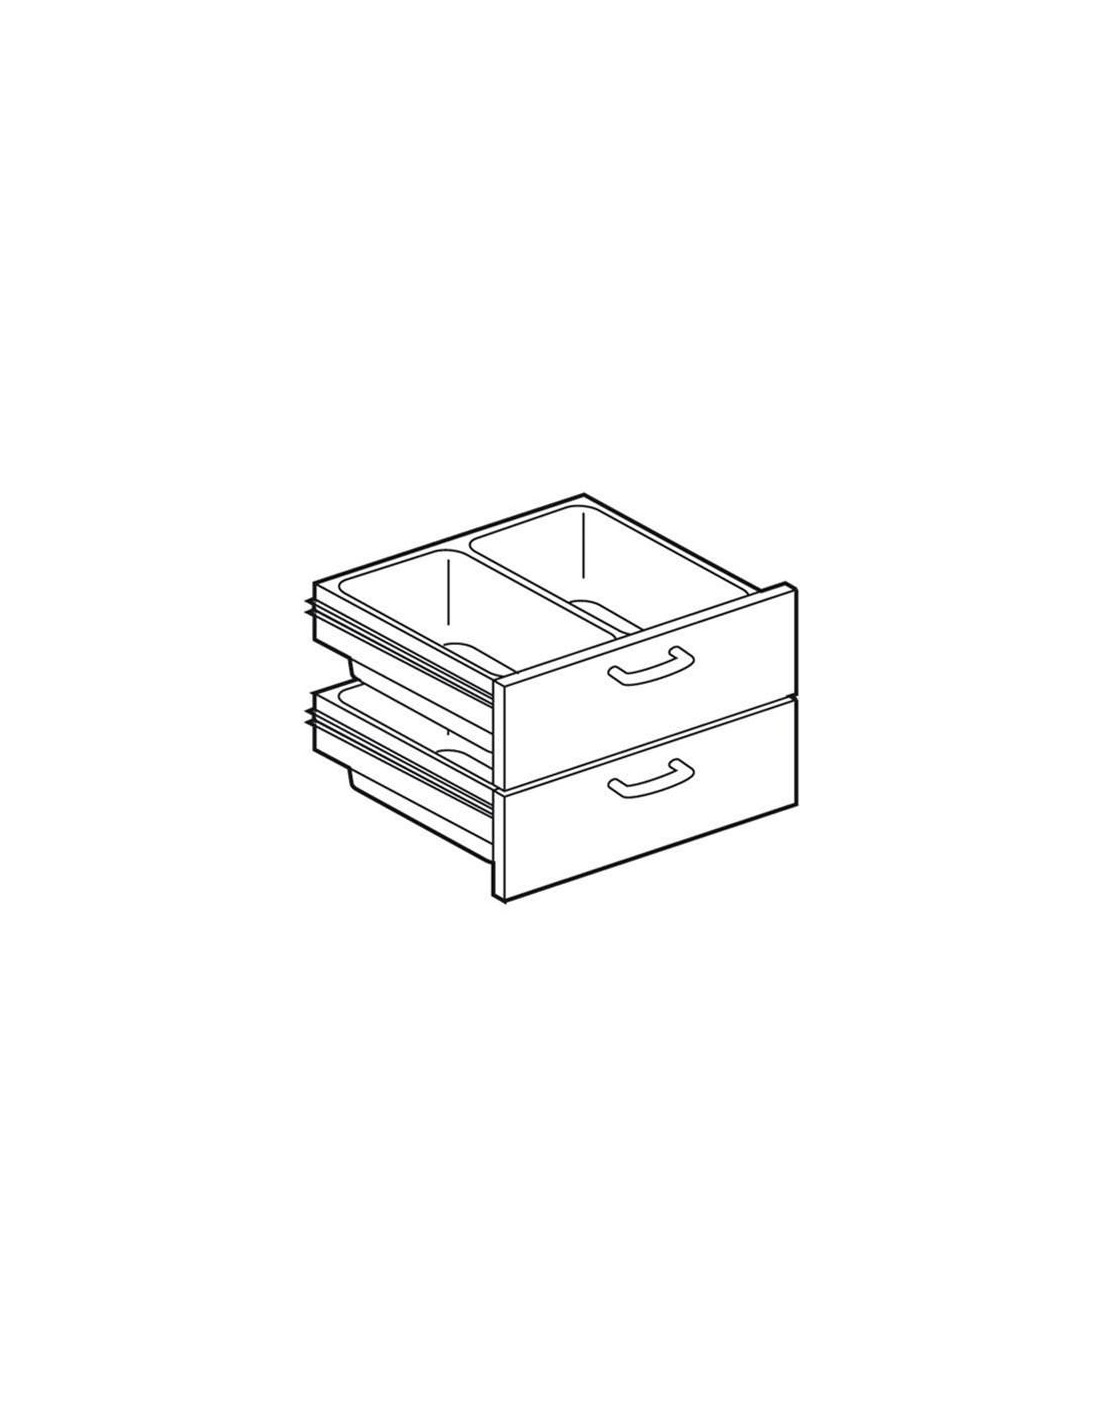 600 drawers for neutral worktops - 2 drawers and 2 stainless steel basins GN 1/1 H15 - cm 59,5 x 59 x 47,5H